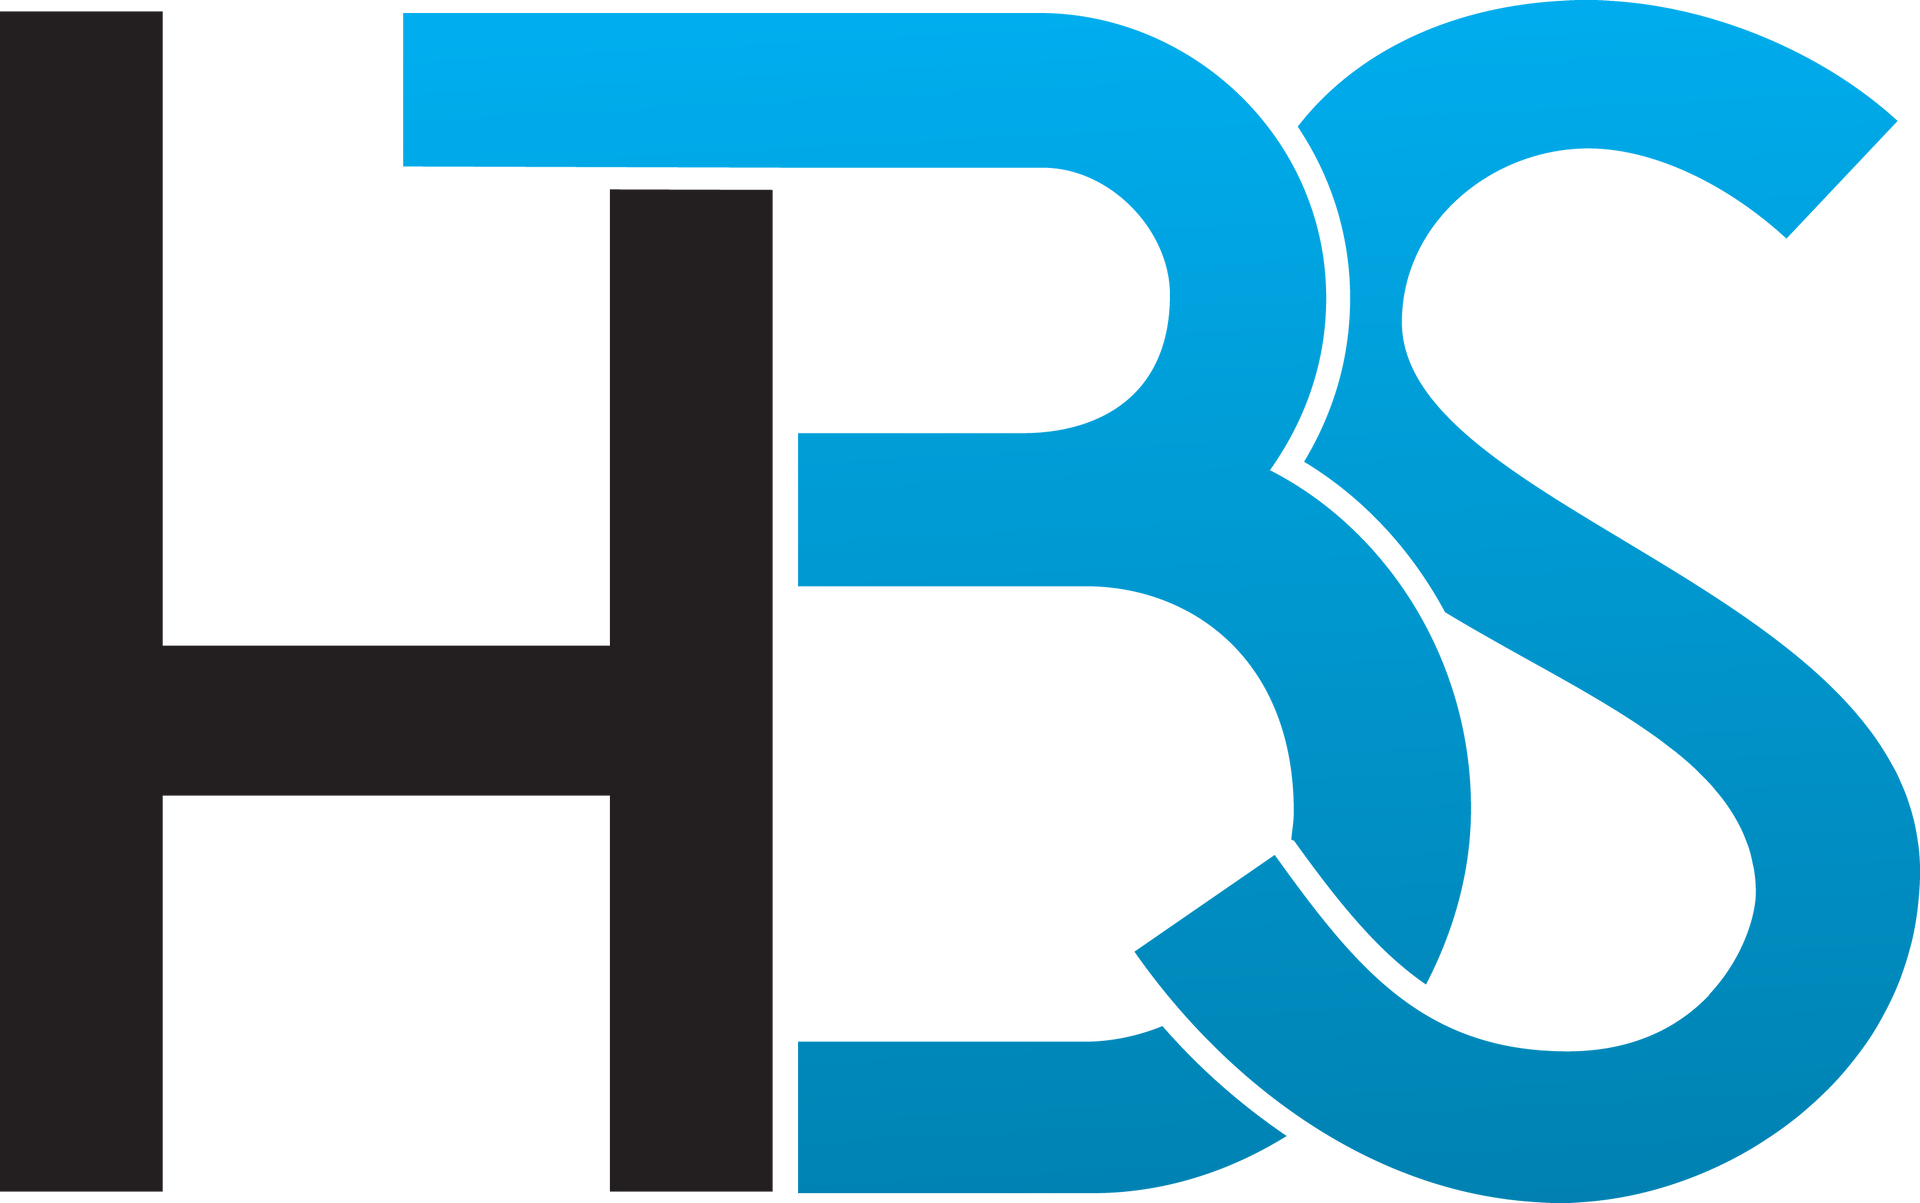 A blue and black logo for a company called hrs.